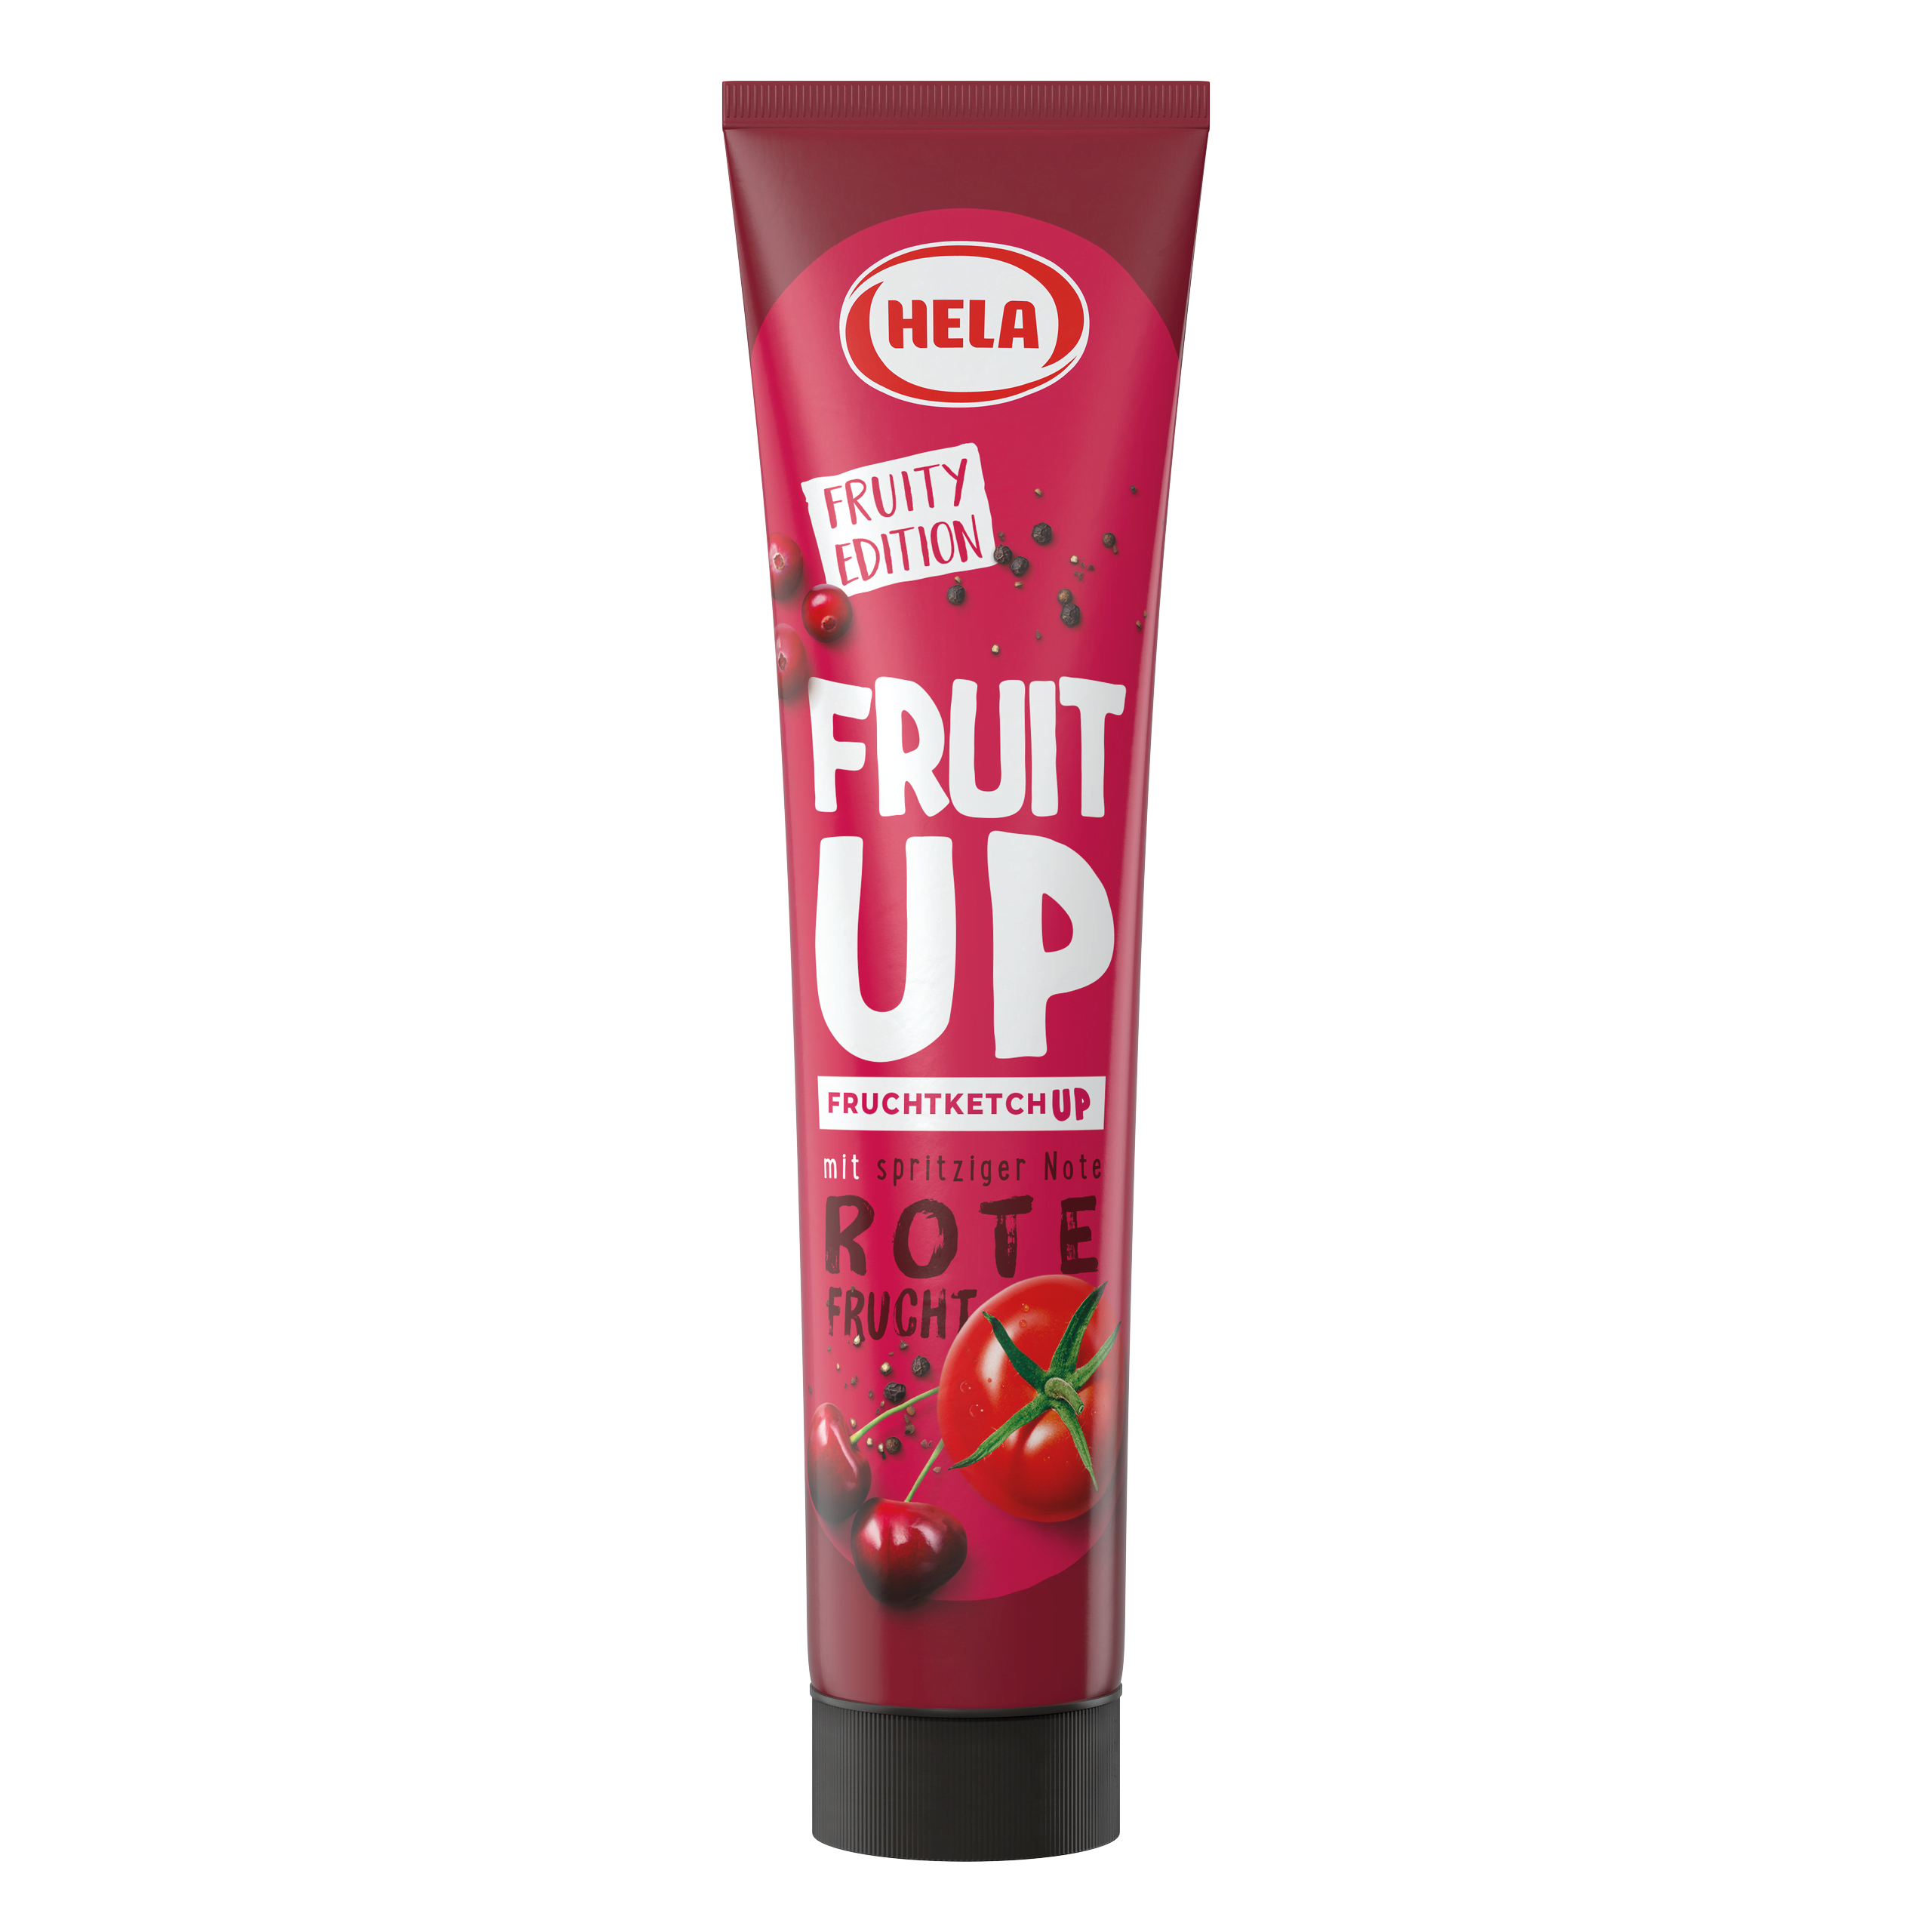 Fruit Up rote Frucht 200 ml Tube